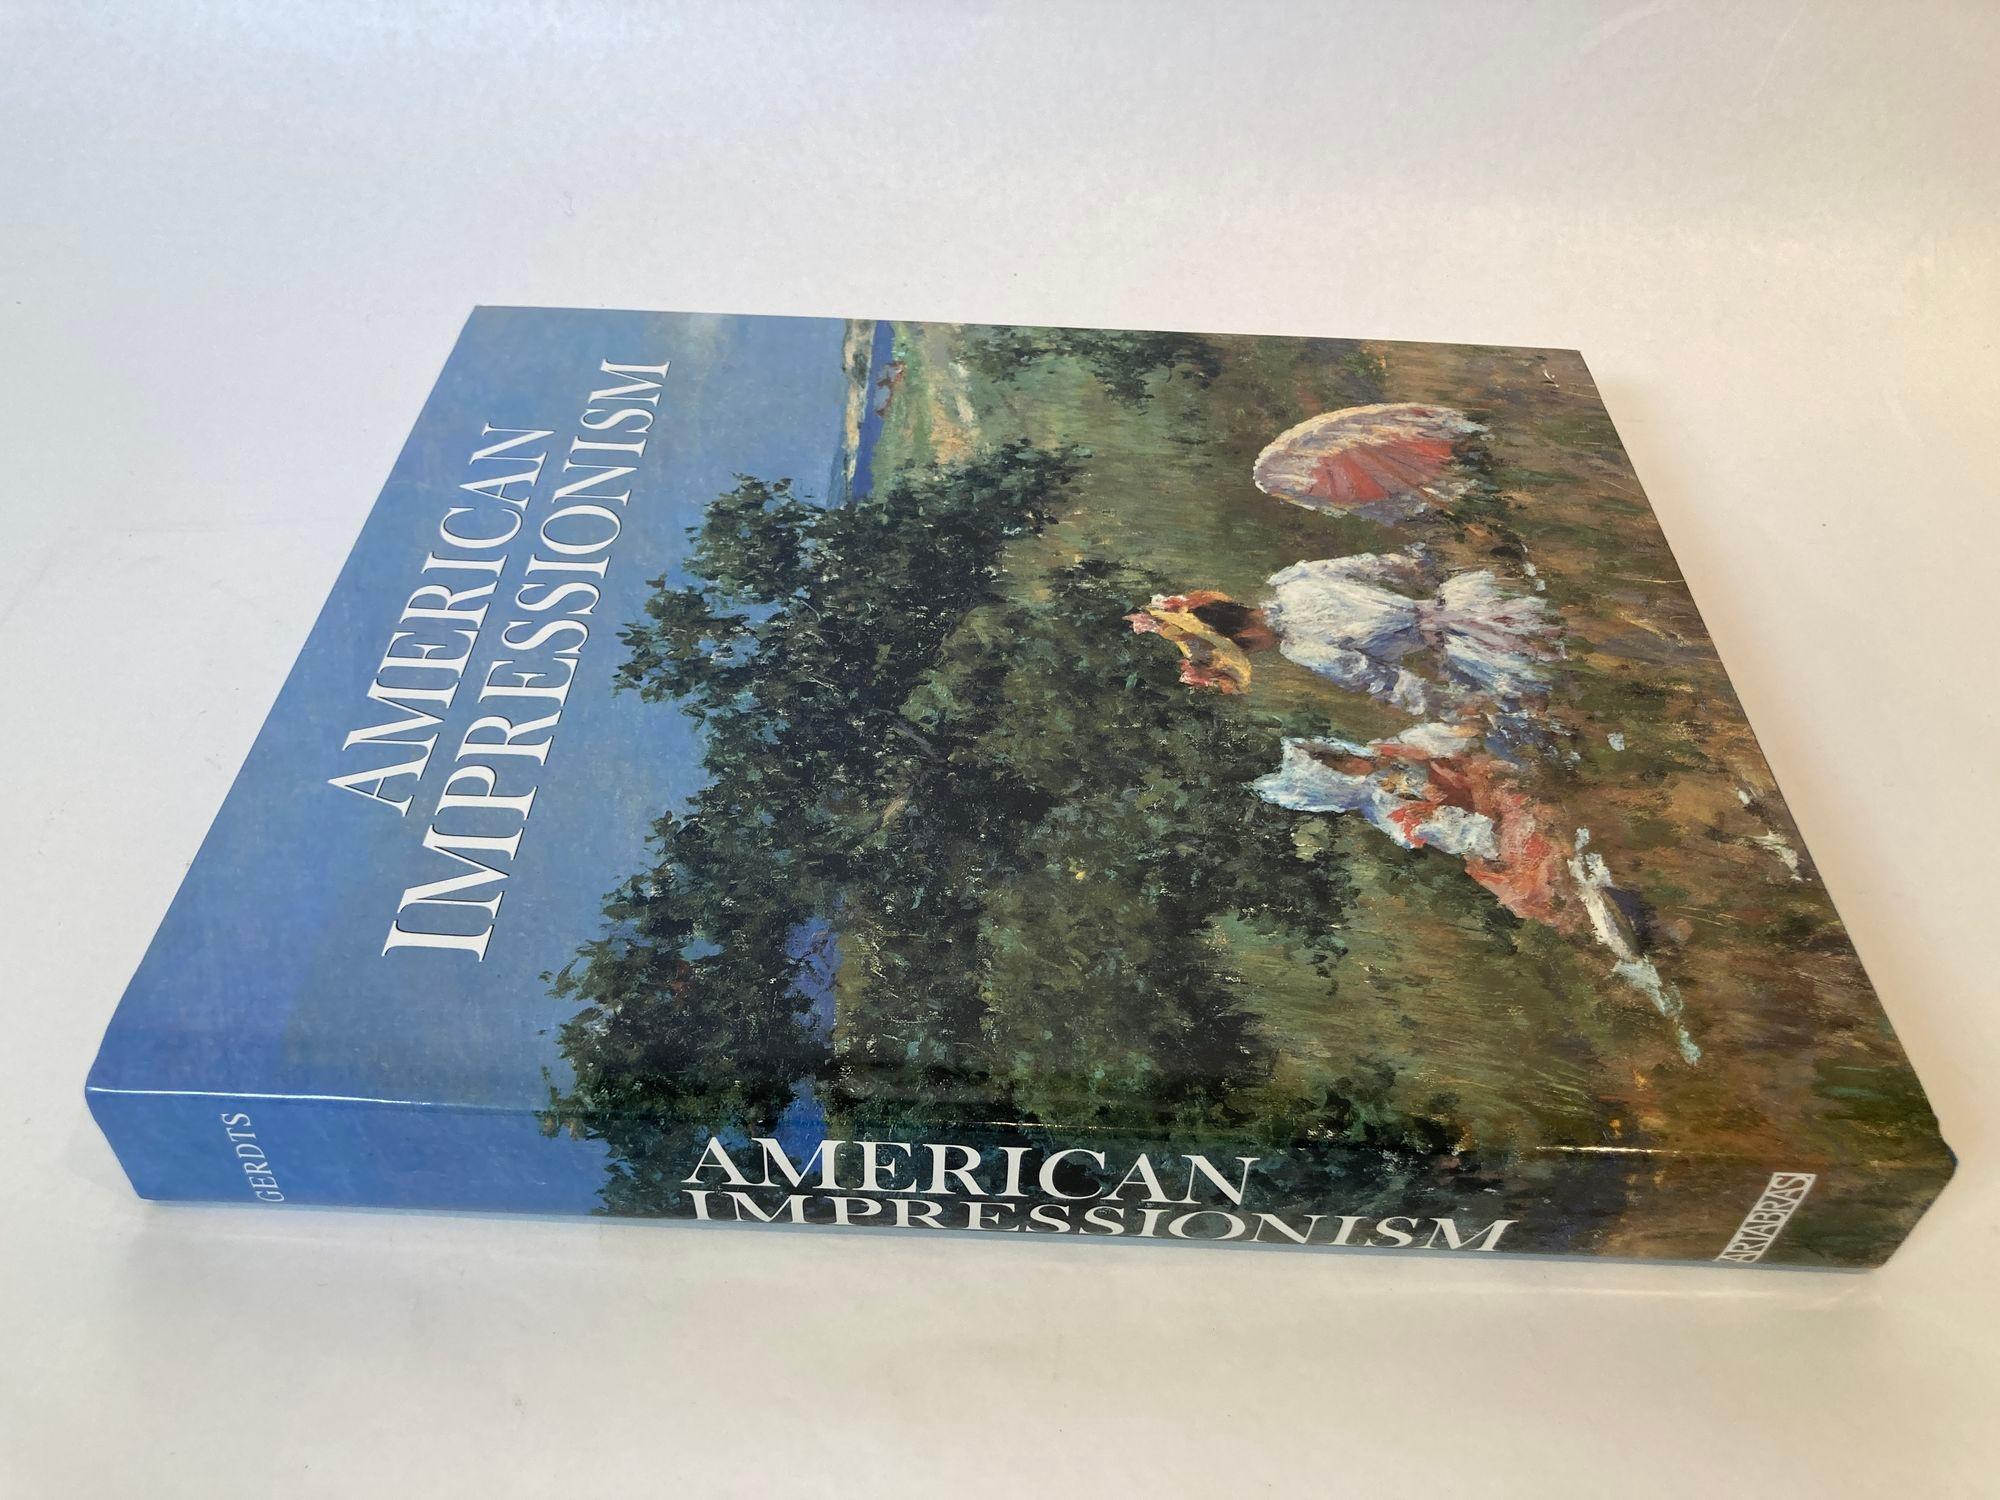 American Classical American Impressionism Oversized Hardcover Book by William H. Gerdts For Sale